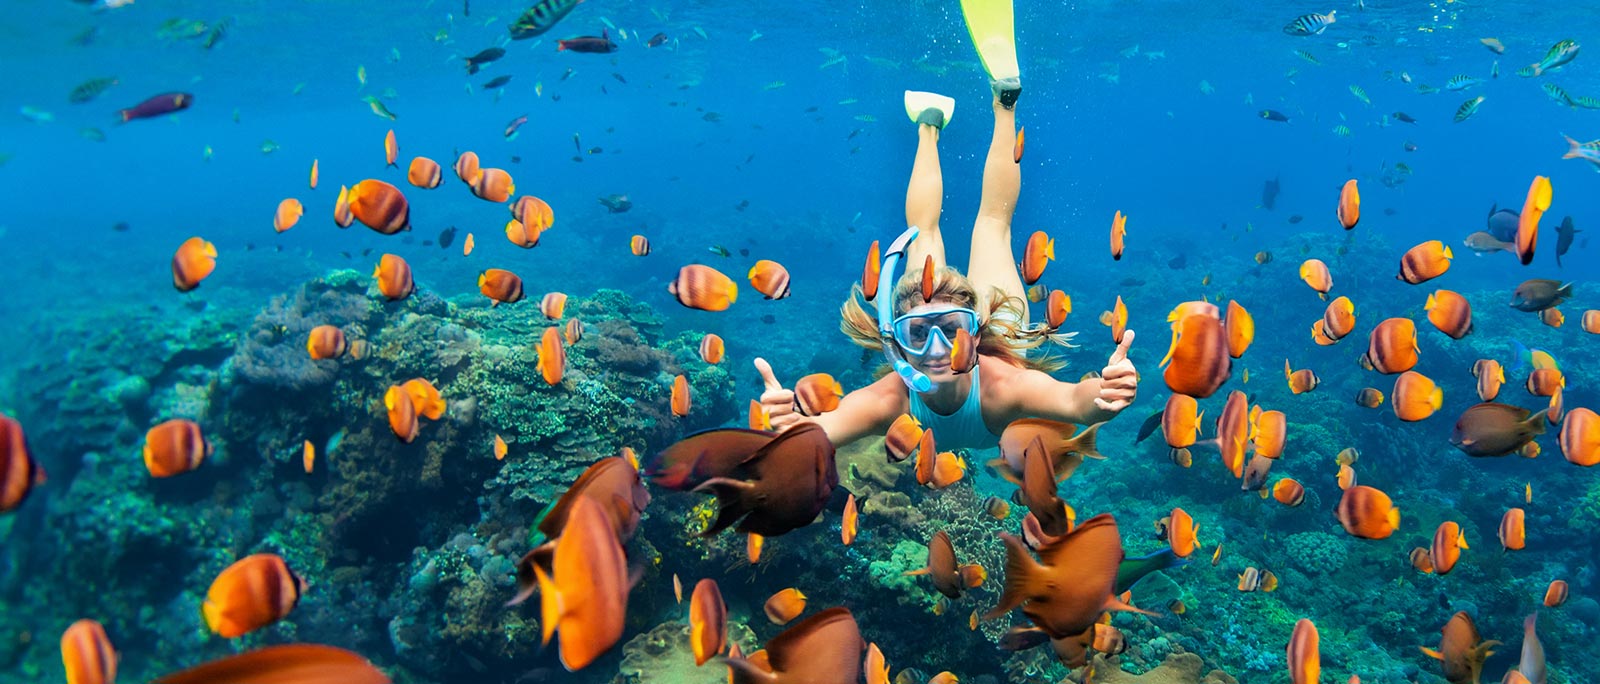 view of a woman snorkeling surrounded by many fish